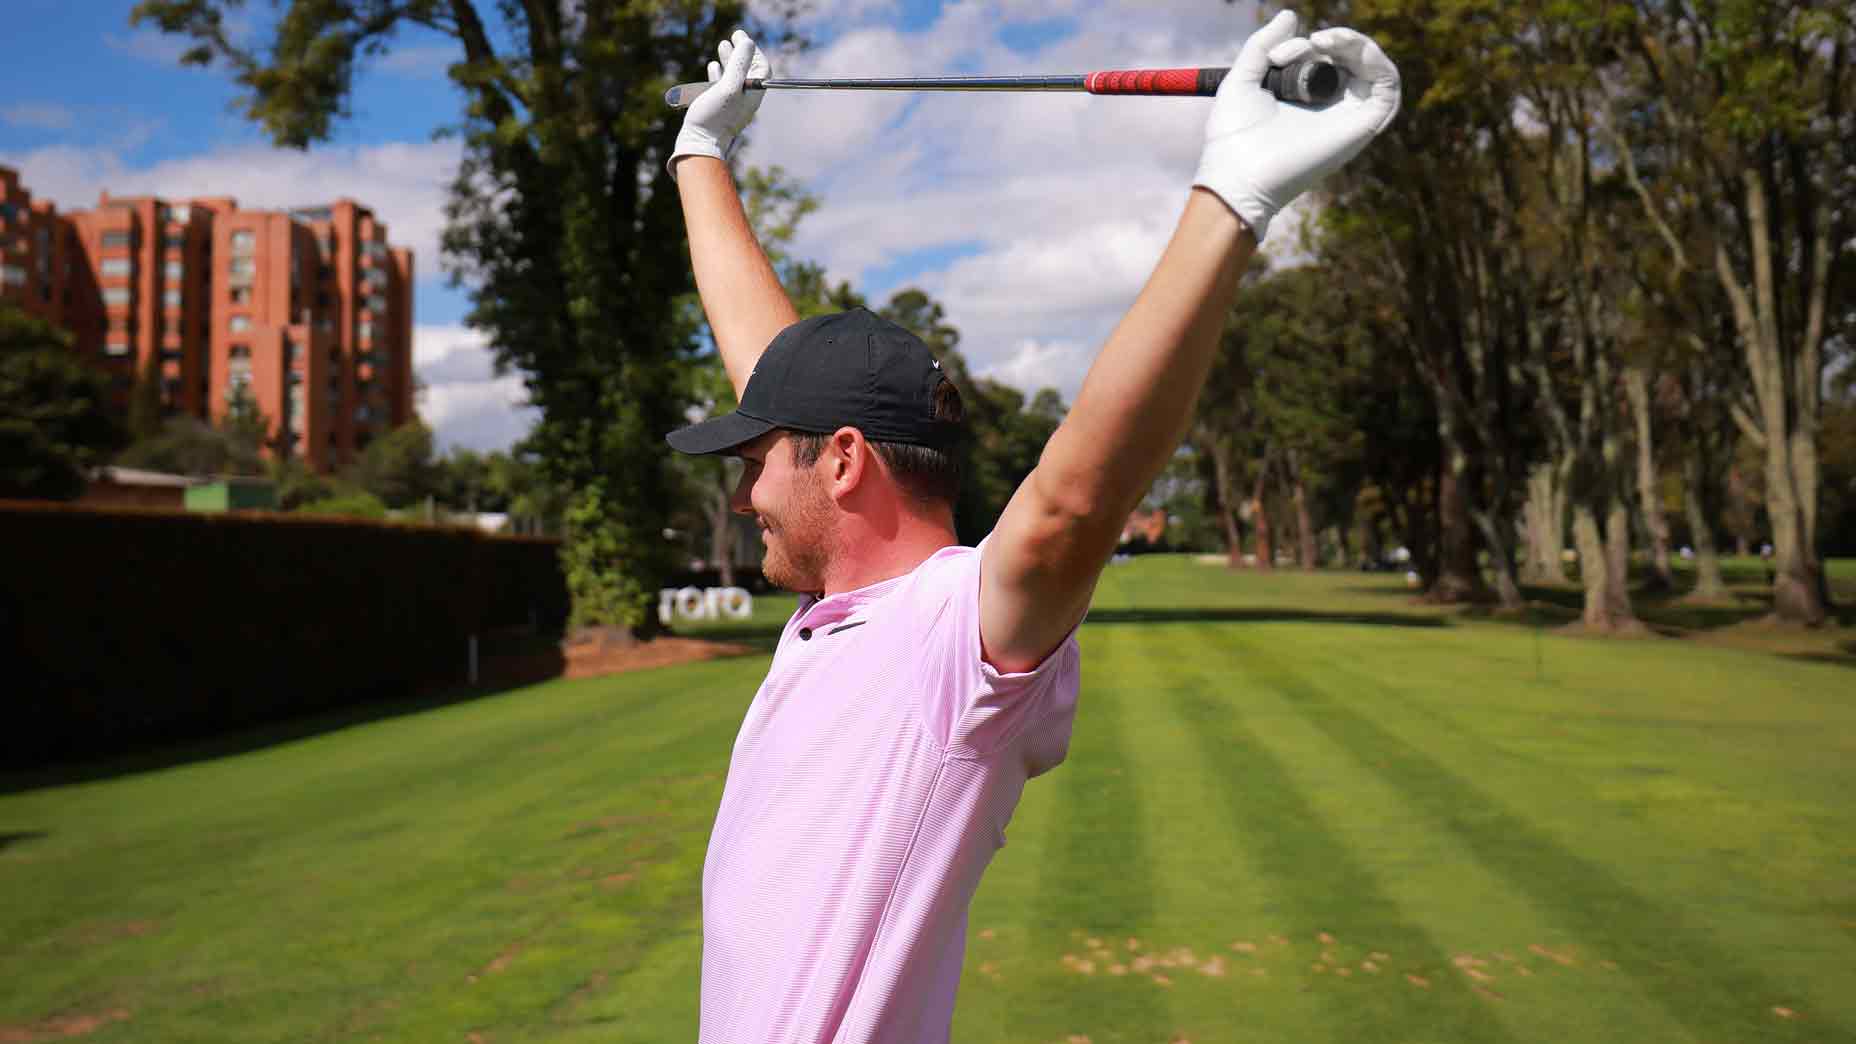 Try this 5-minute golf stretch routine to get loose and play your best